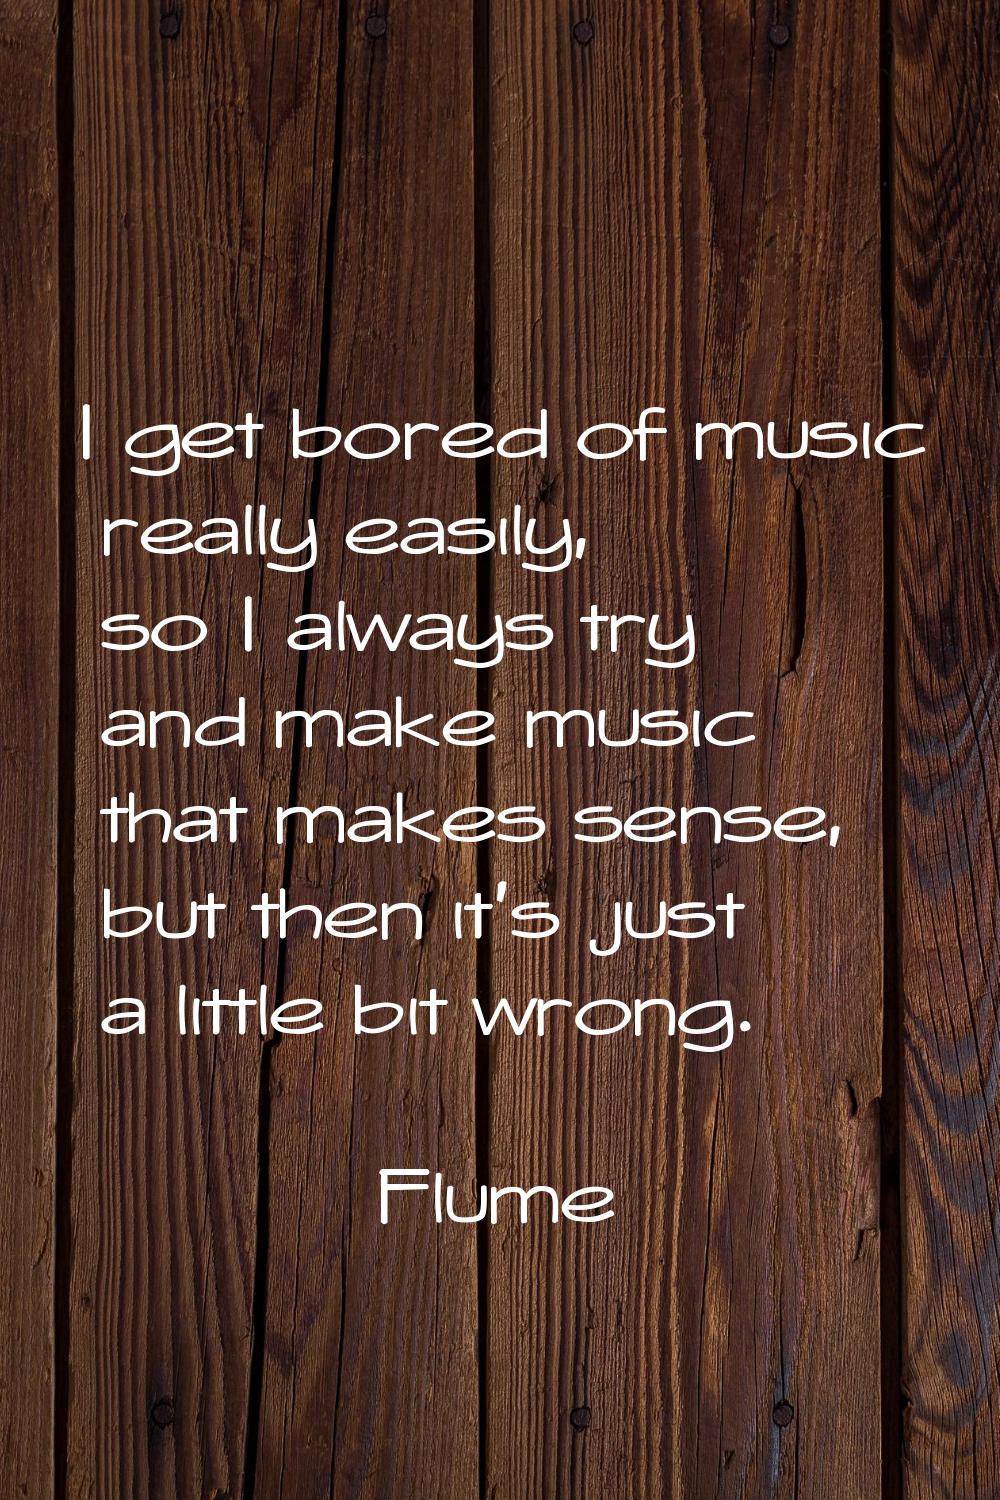 I get bored of music really easily, so I always try and make music that makes sense, but then it's 